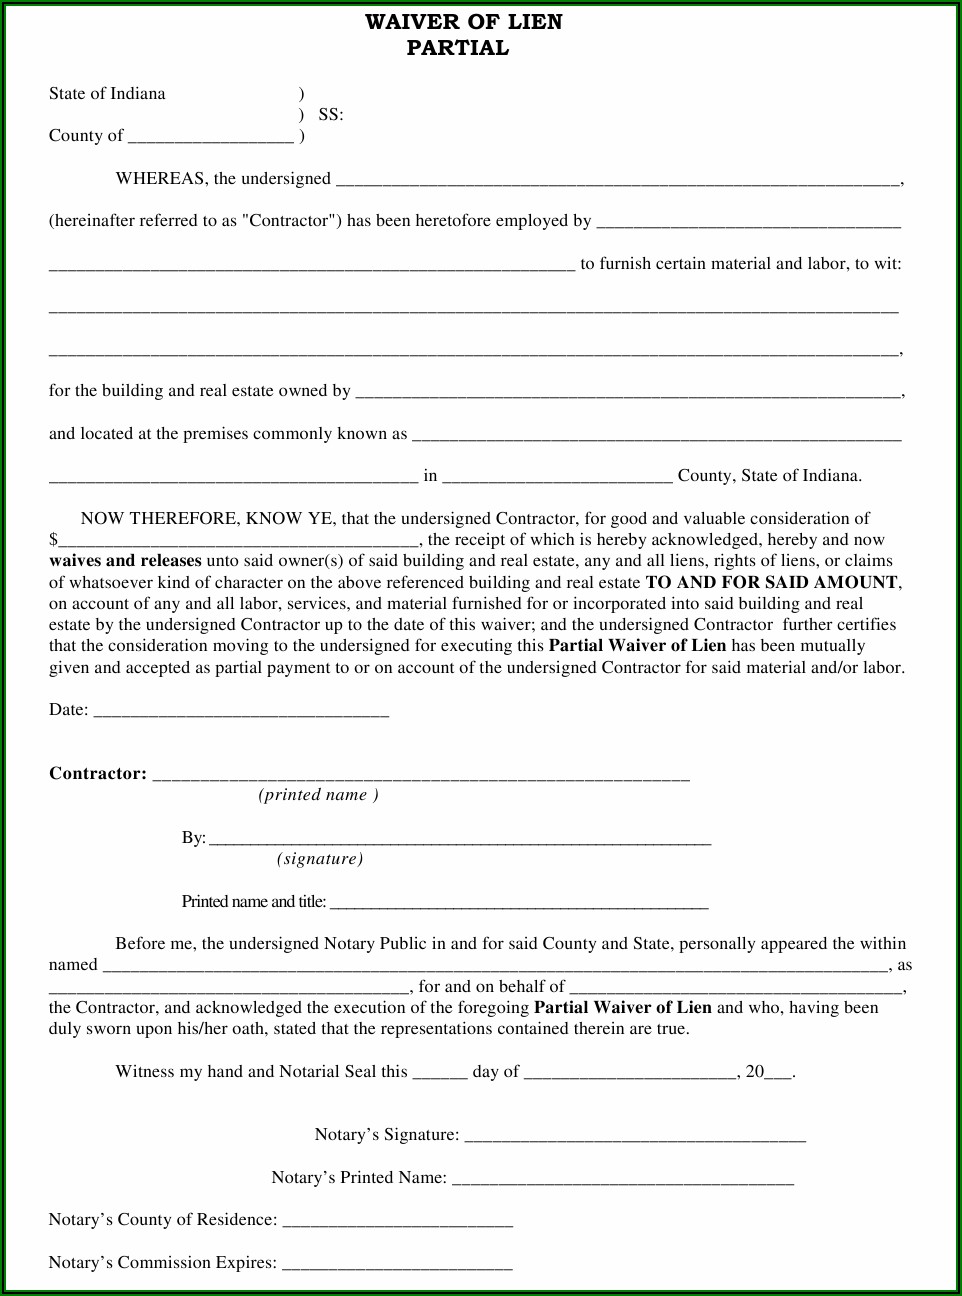 Partial Waiver Of Lien Form Indiana